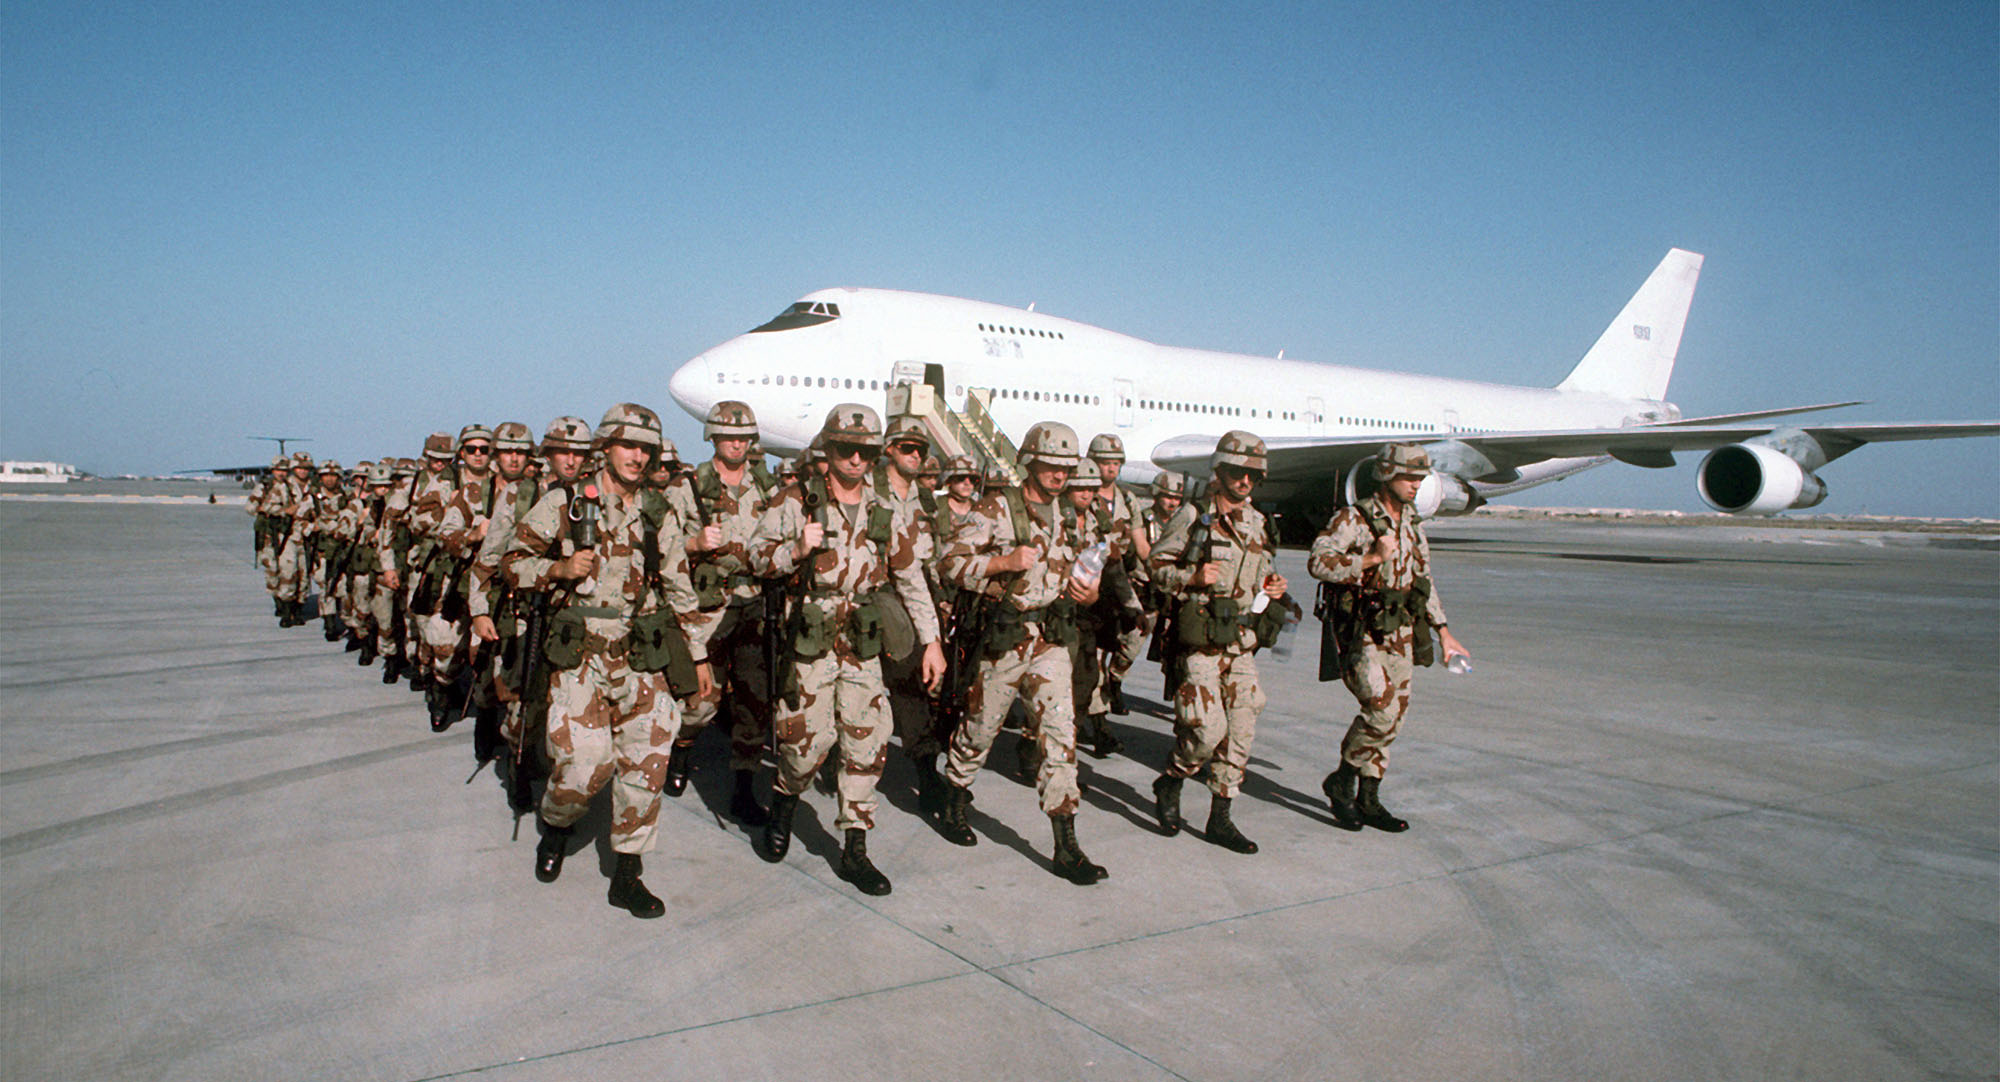 Troops march in formation after disembarking from a Civil Reserve Air Fleet Boeing 747 aircraft upon their arrival in support of Operation Desert Shield. Image: Getty / DOD